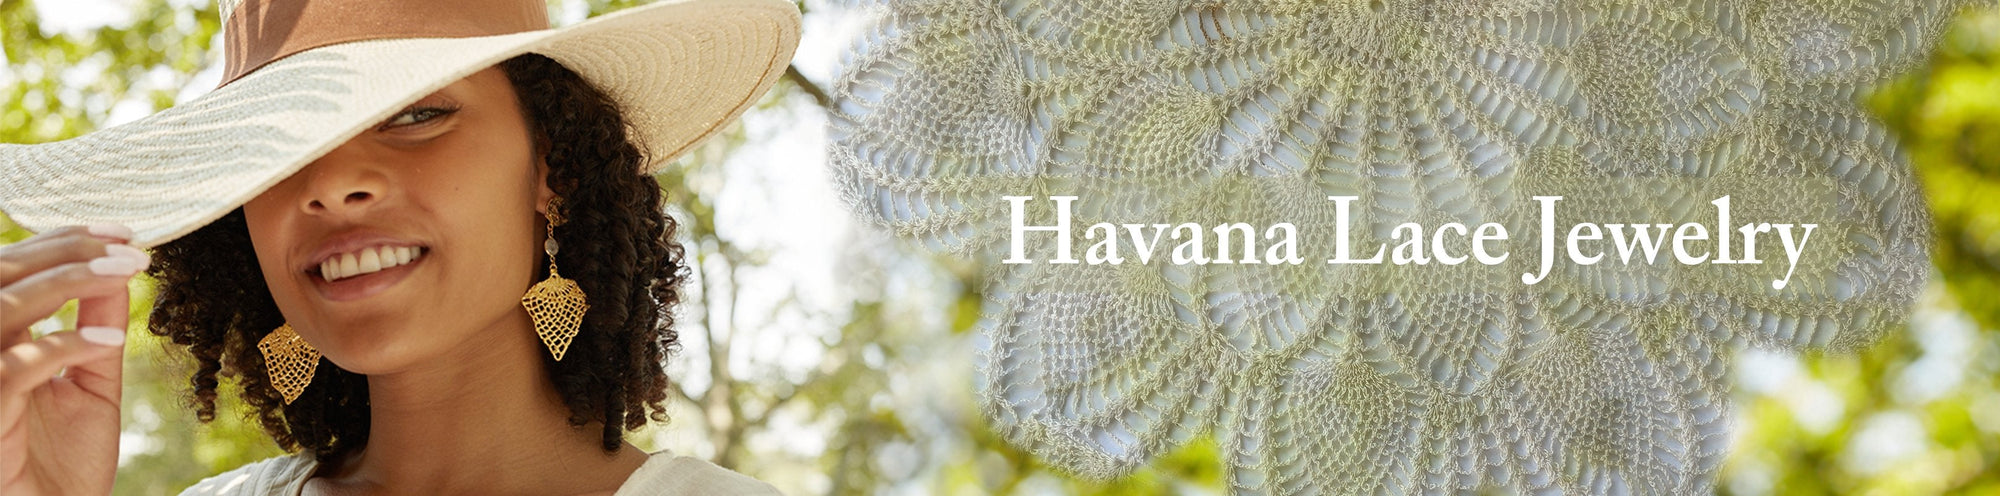 Carmen Fiol, a collection of lace jewelry inspired by Havana. 